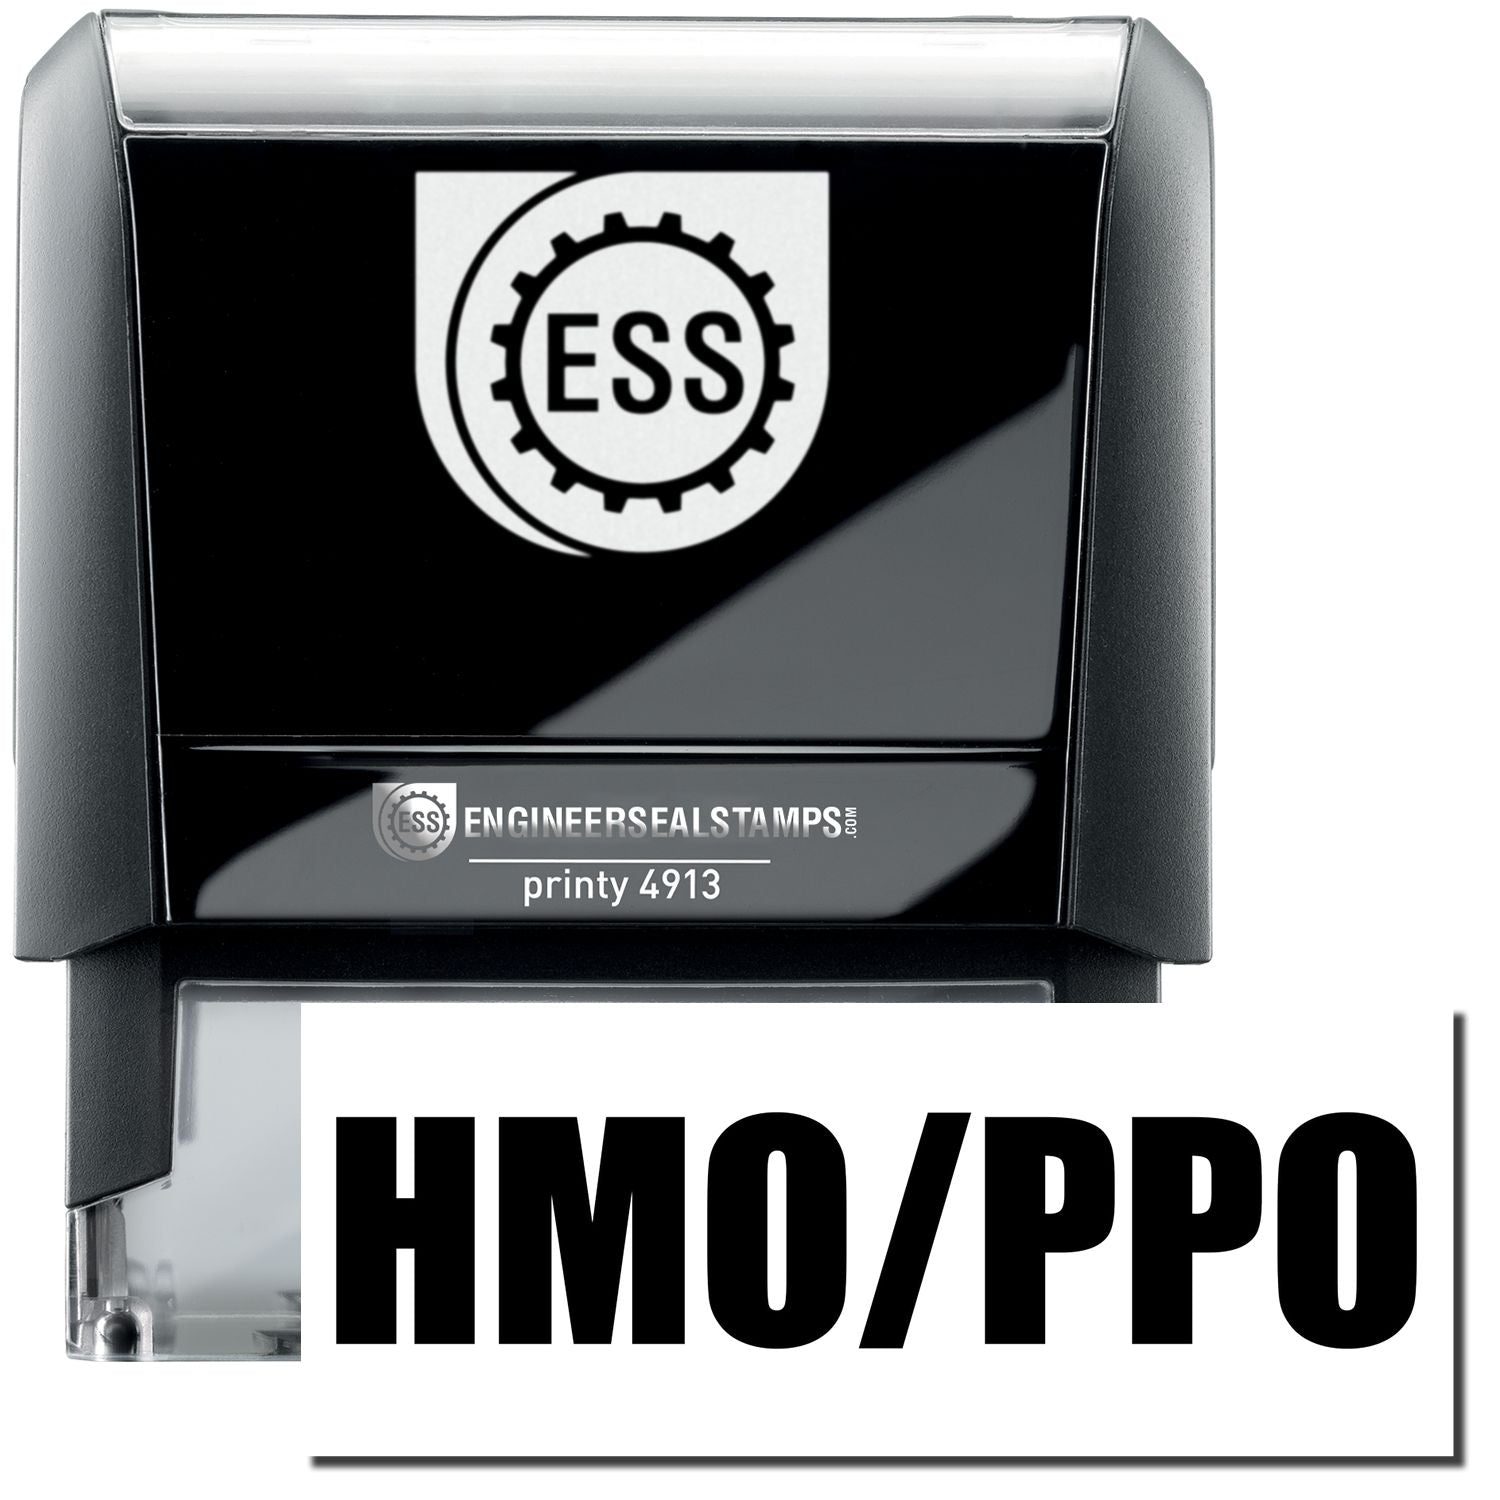 A self-inking stamp with a stamped image showing how the text "HMO/PPO" in a large bold font is displayed by it.